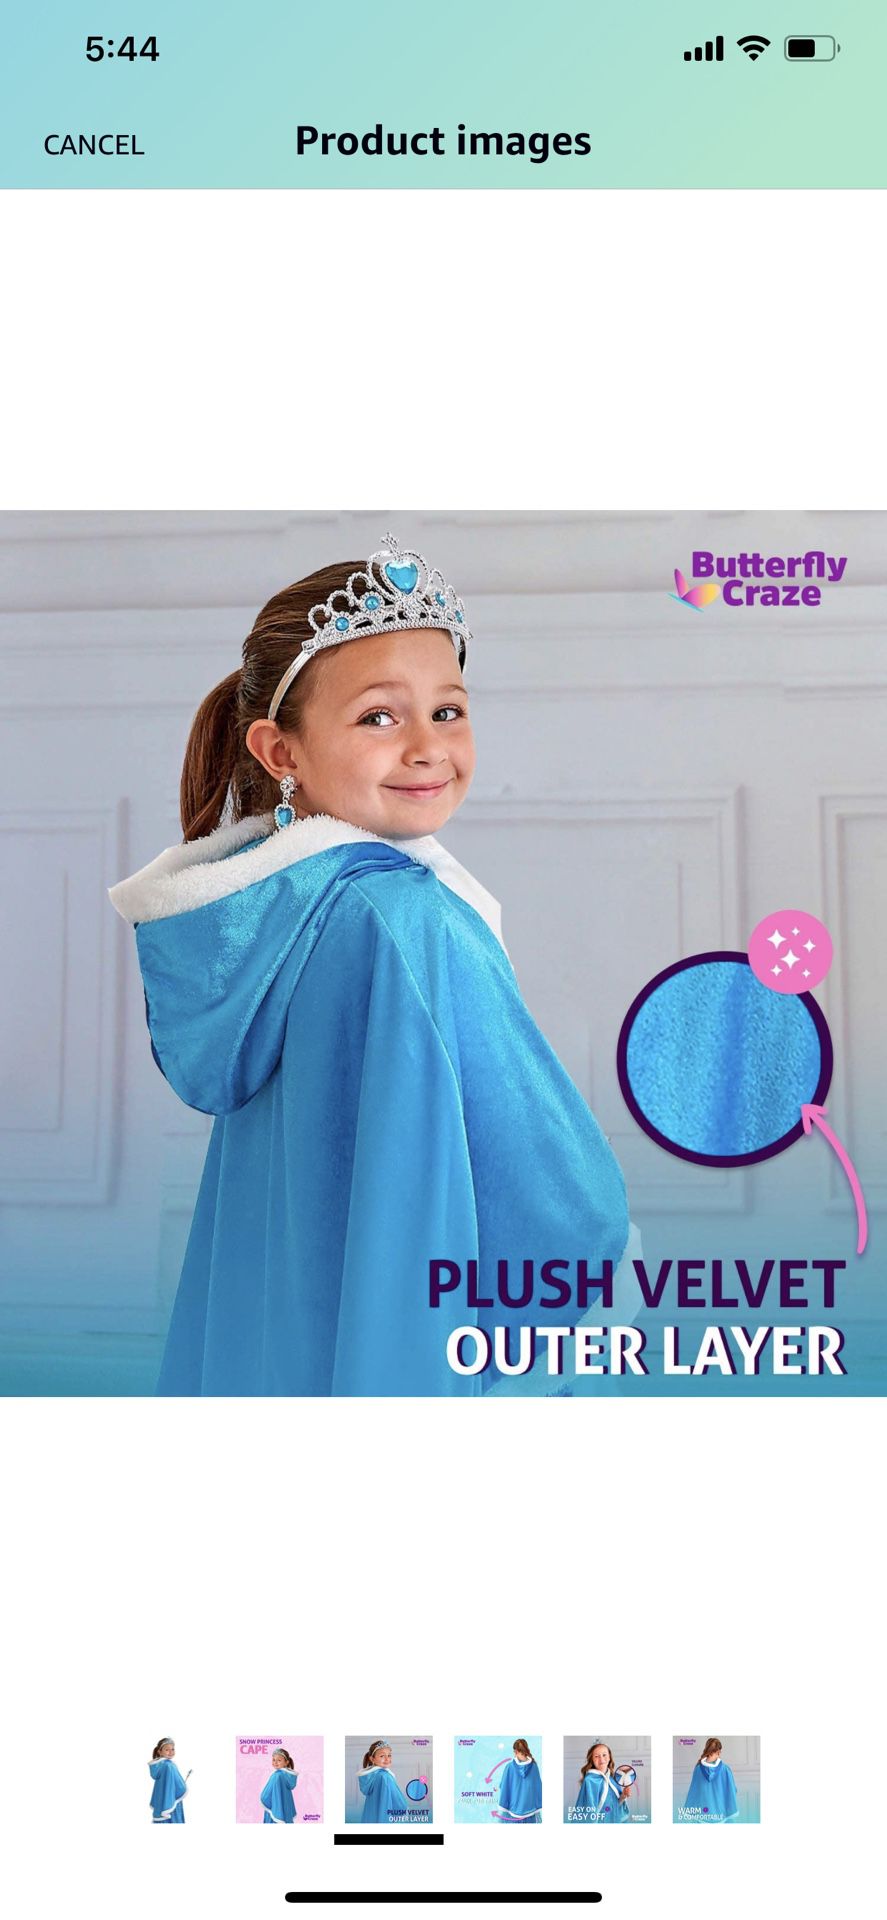 Brand New Princess Hooded Cloak With Crown And Wand 3-4 Years Old Costume